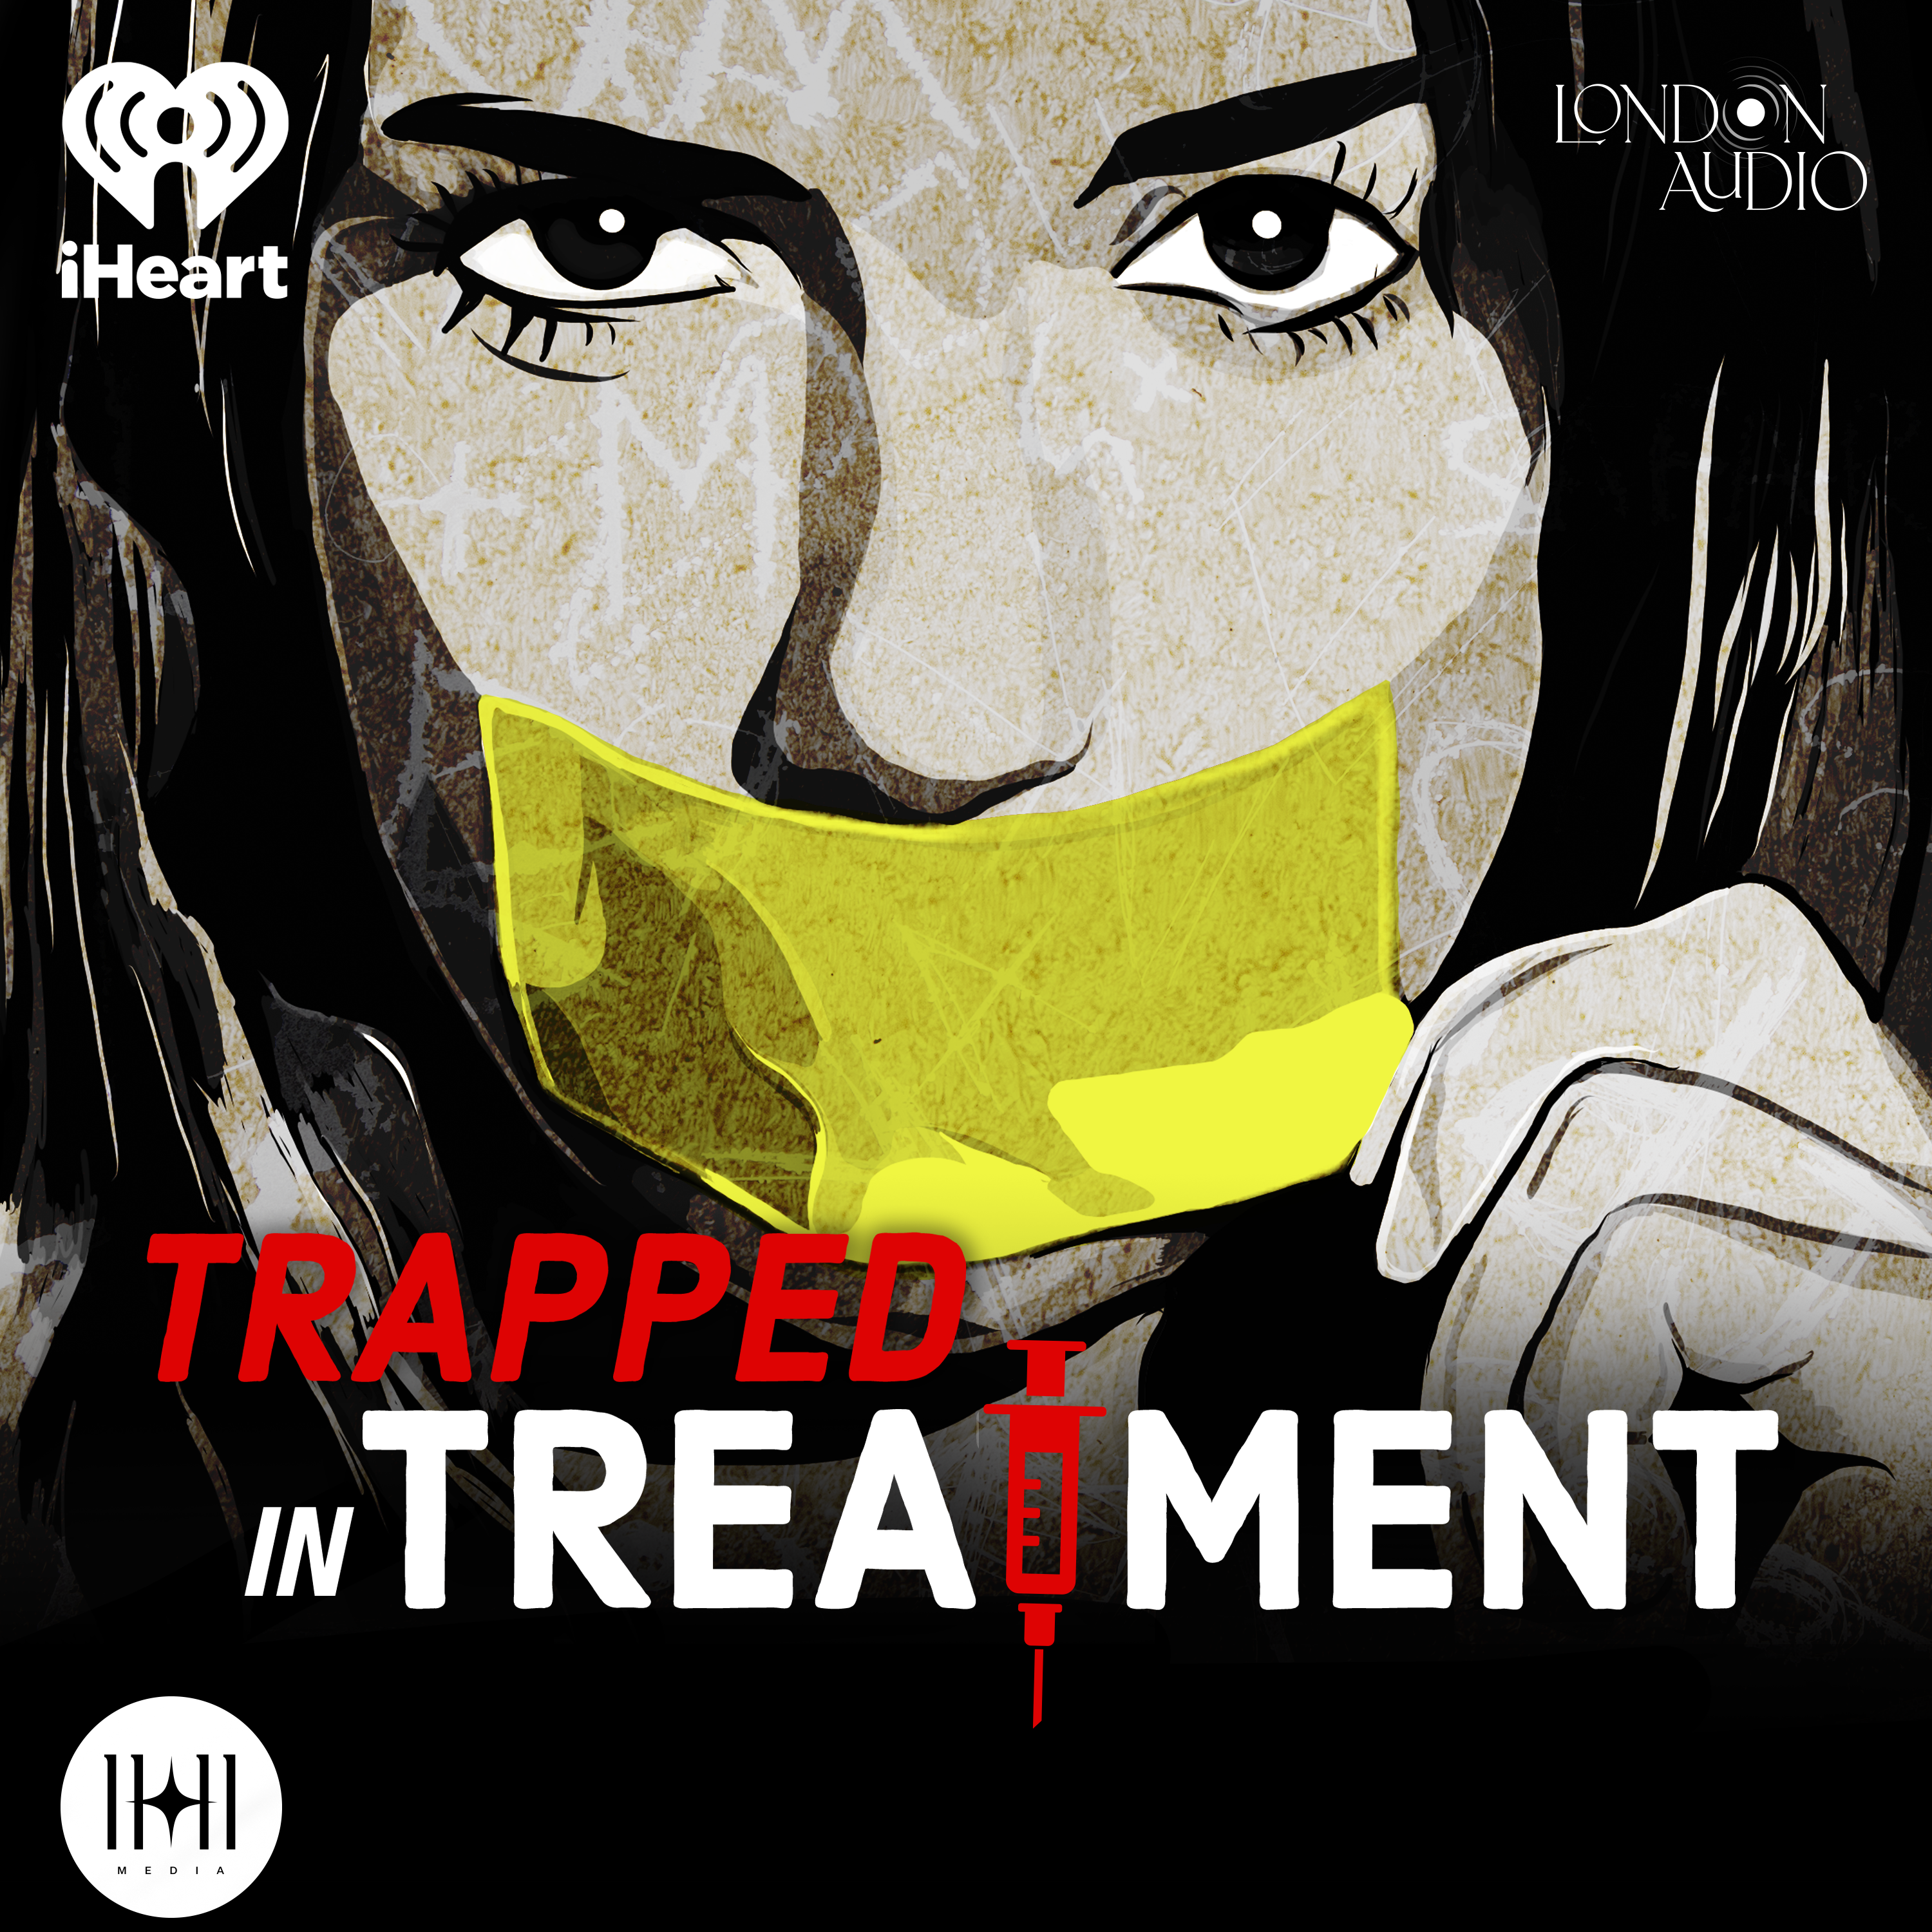 INTRODUCING SEASON 2: Trapped In Treatment